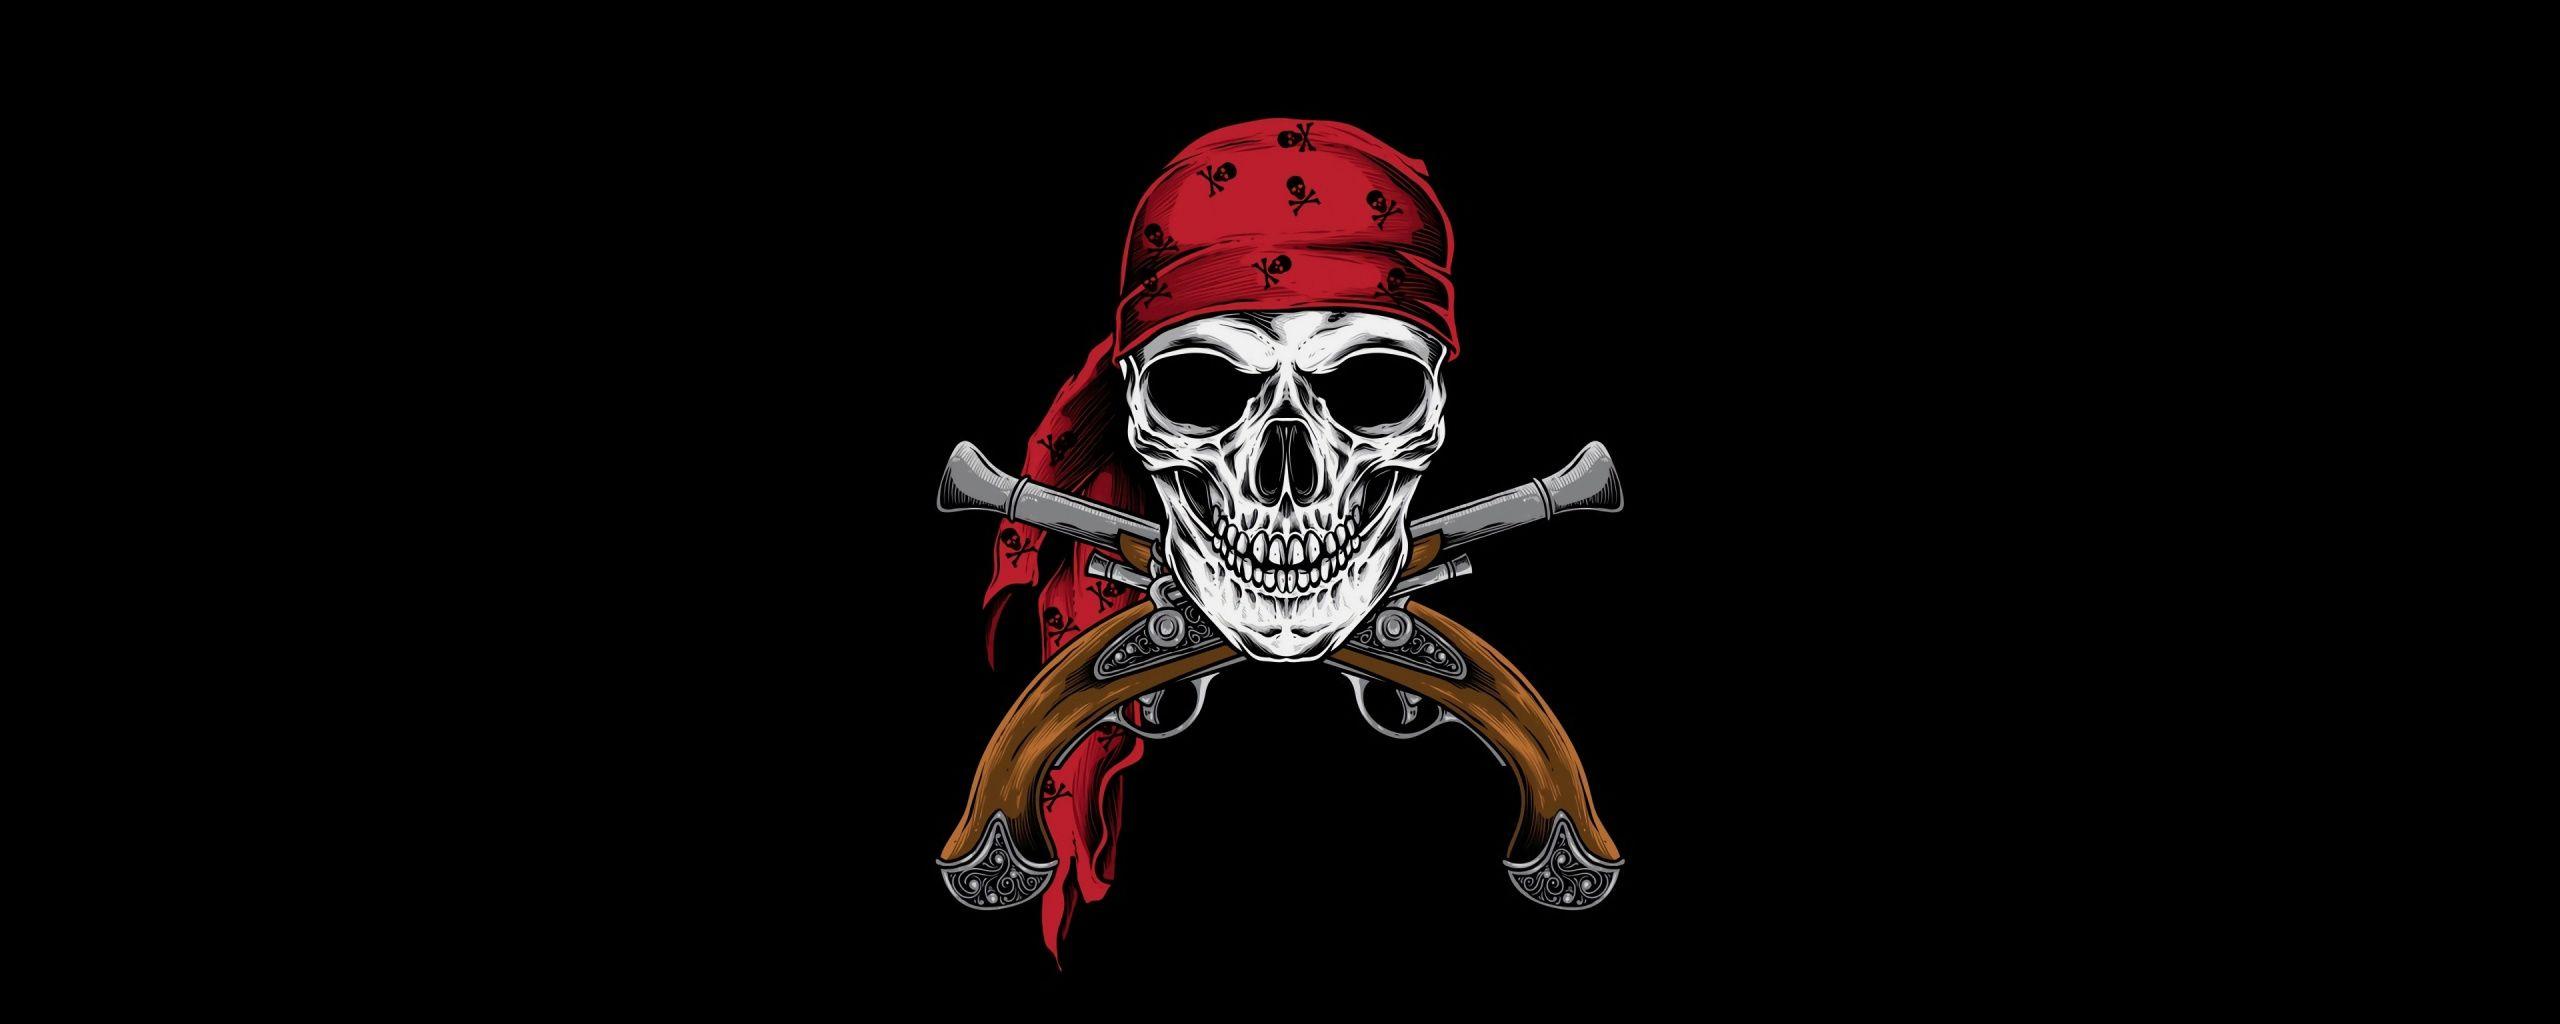 Pirate Skull Wallpapers - Top Free Pirate Skull Backgrounds ...